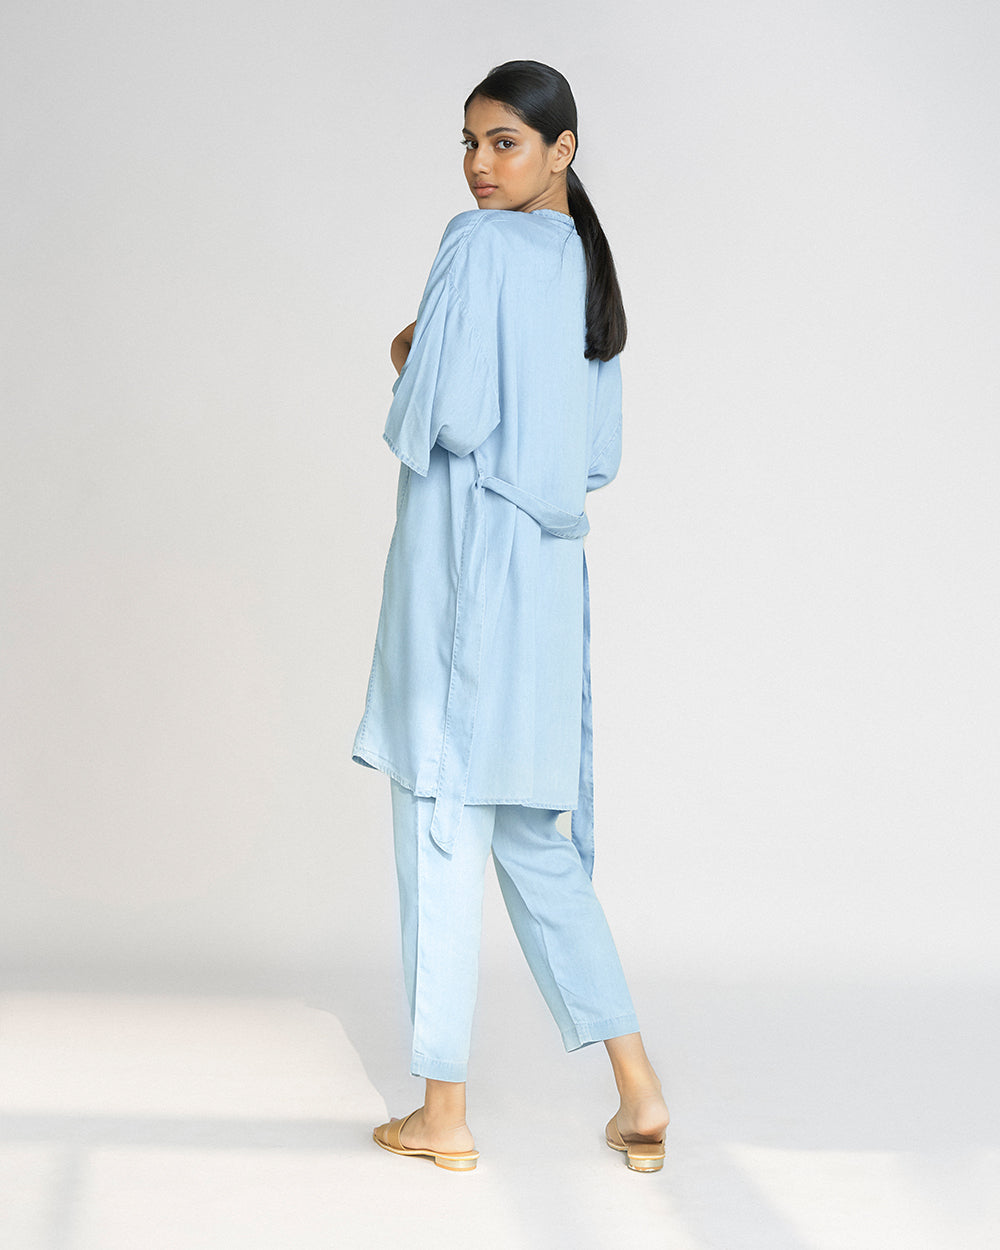 Blue Kimono Overlay by Reistor with Blue, Casual Wear, Denim, Denim Restored by Reistor, Natural, Overlays, Relaxed Fit, Shrugs, Solids, Tencel, Womenswear at Kamakhyaa for sustainable fashion